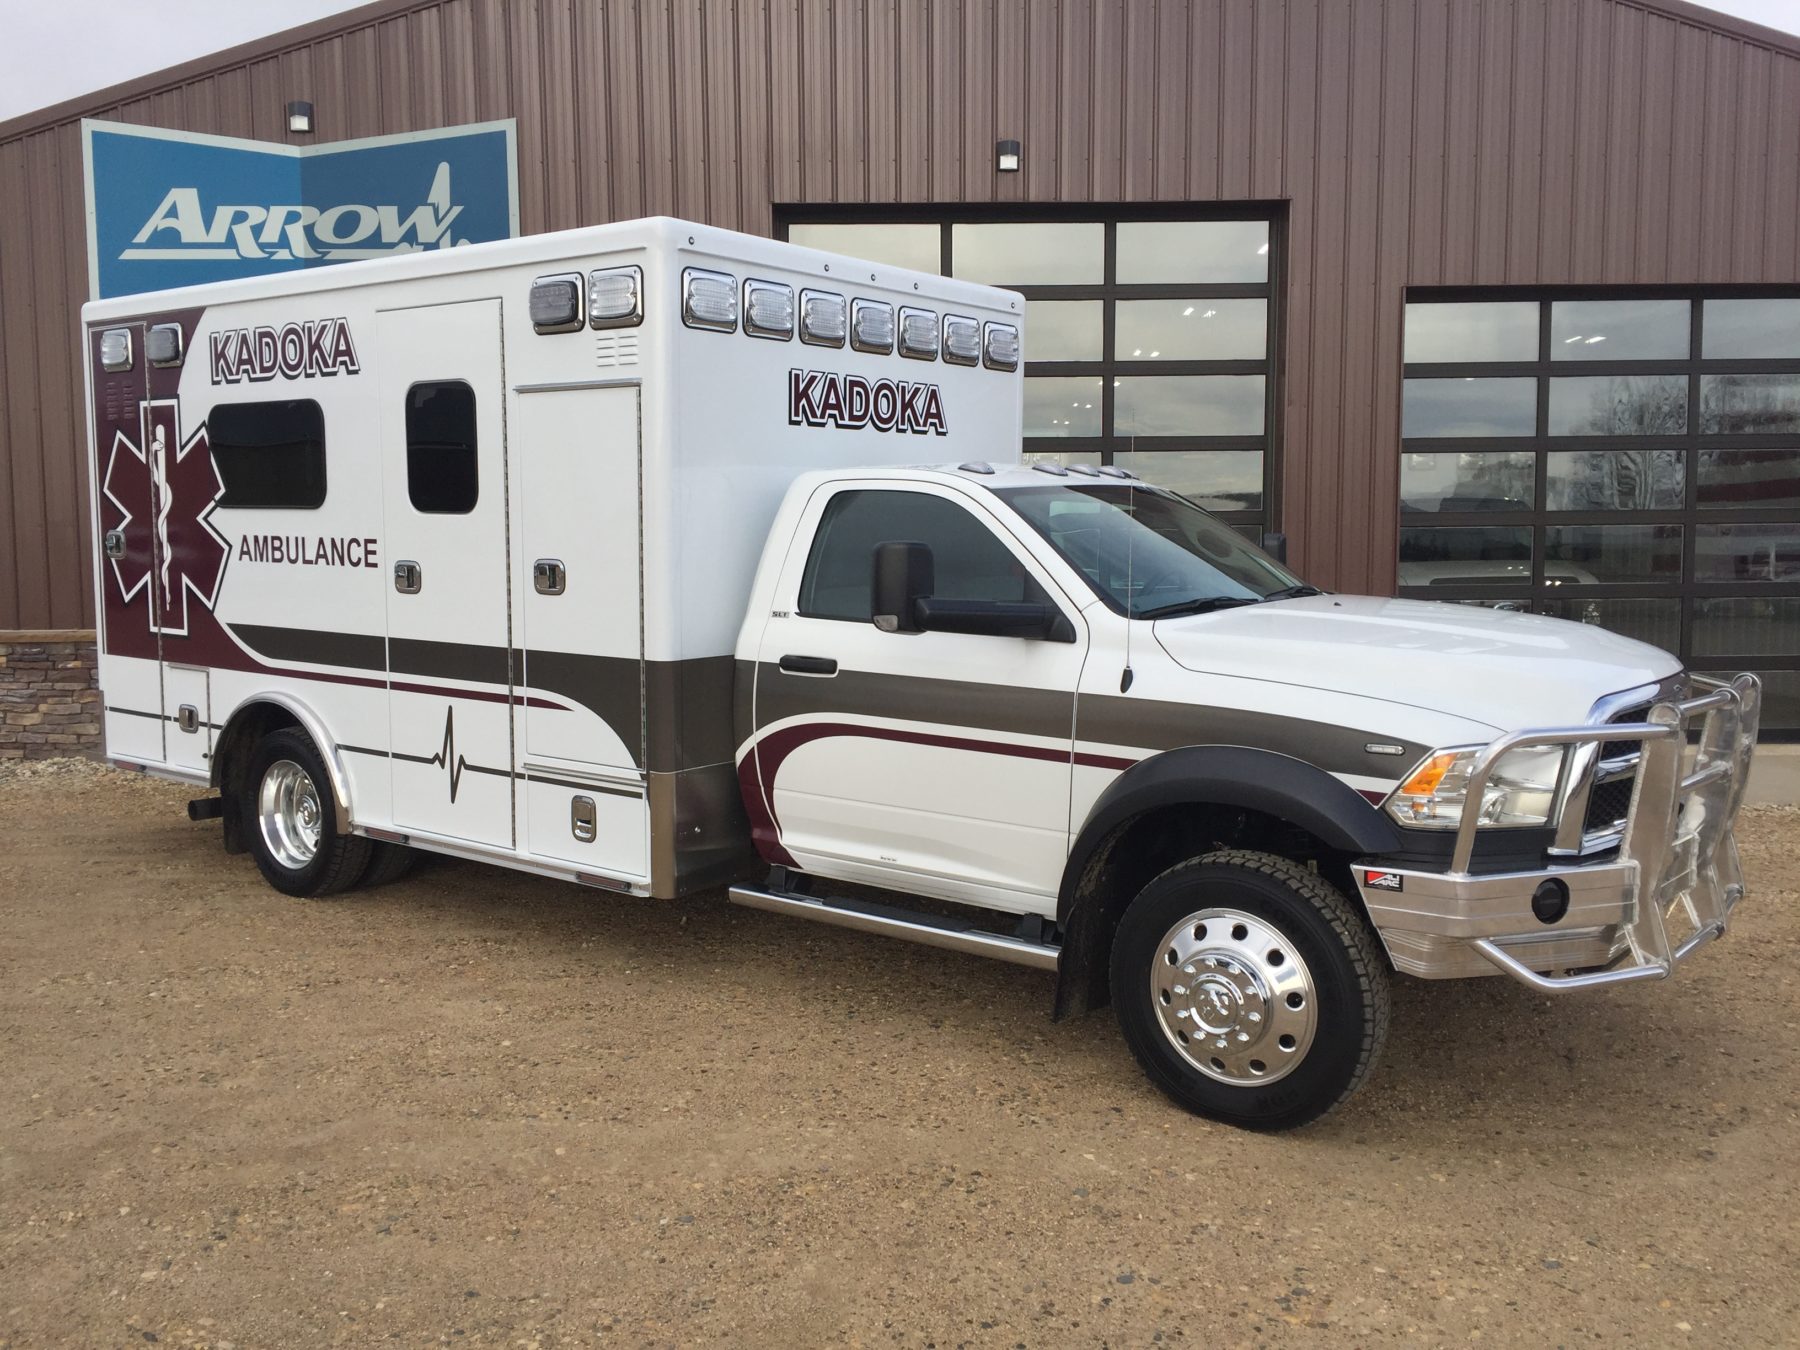 2018 Ram 4500 4x4 Heavy Duty Ambulance For Sale – Picture 3